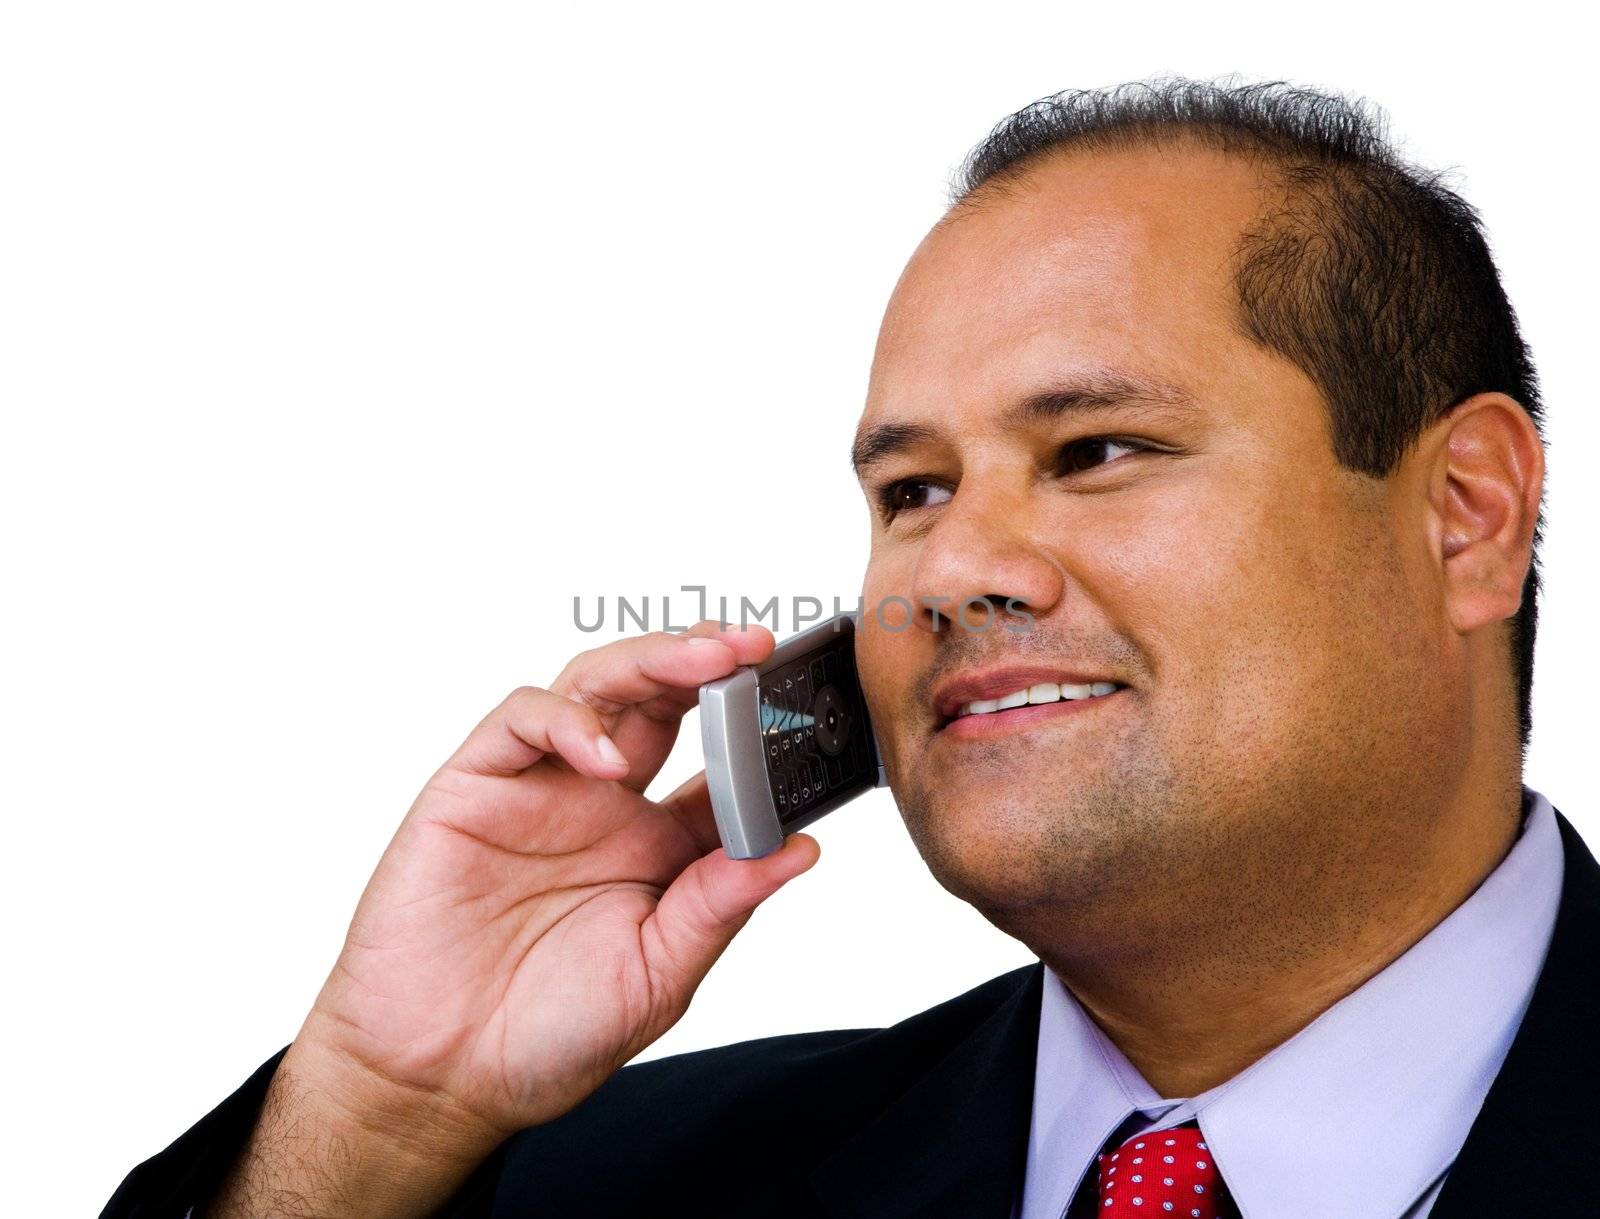 Businessman talking on a mobile phone and smiling isolated over white